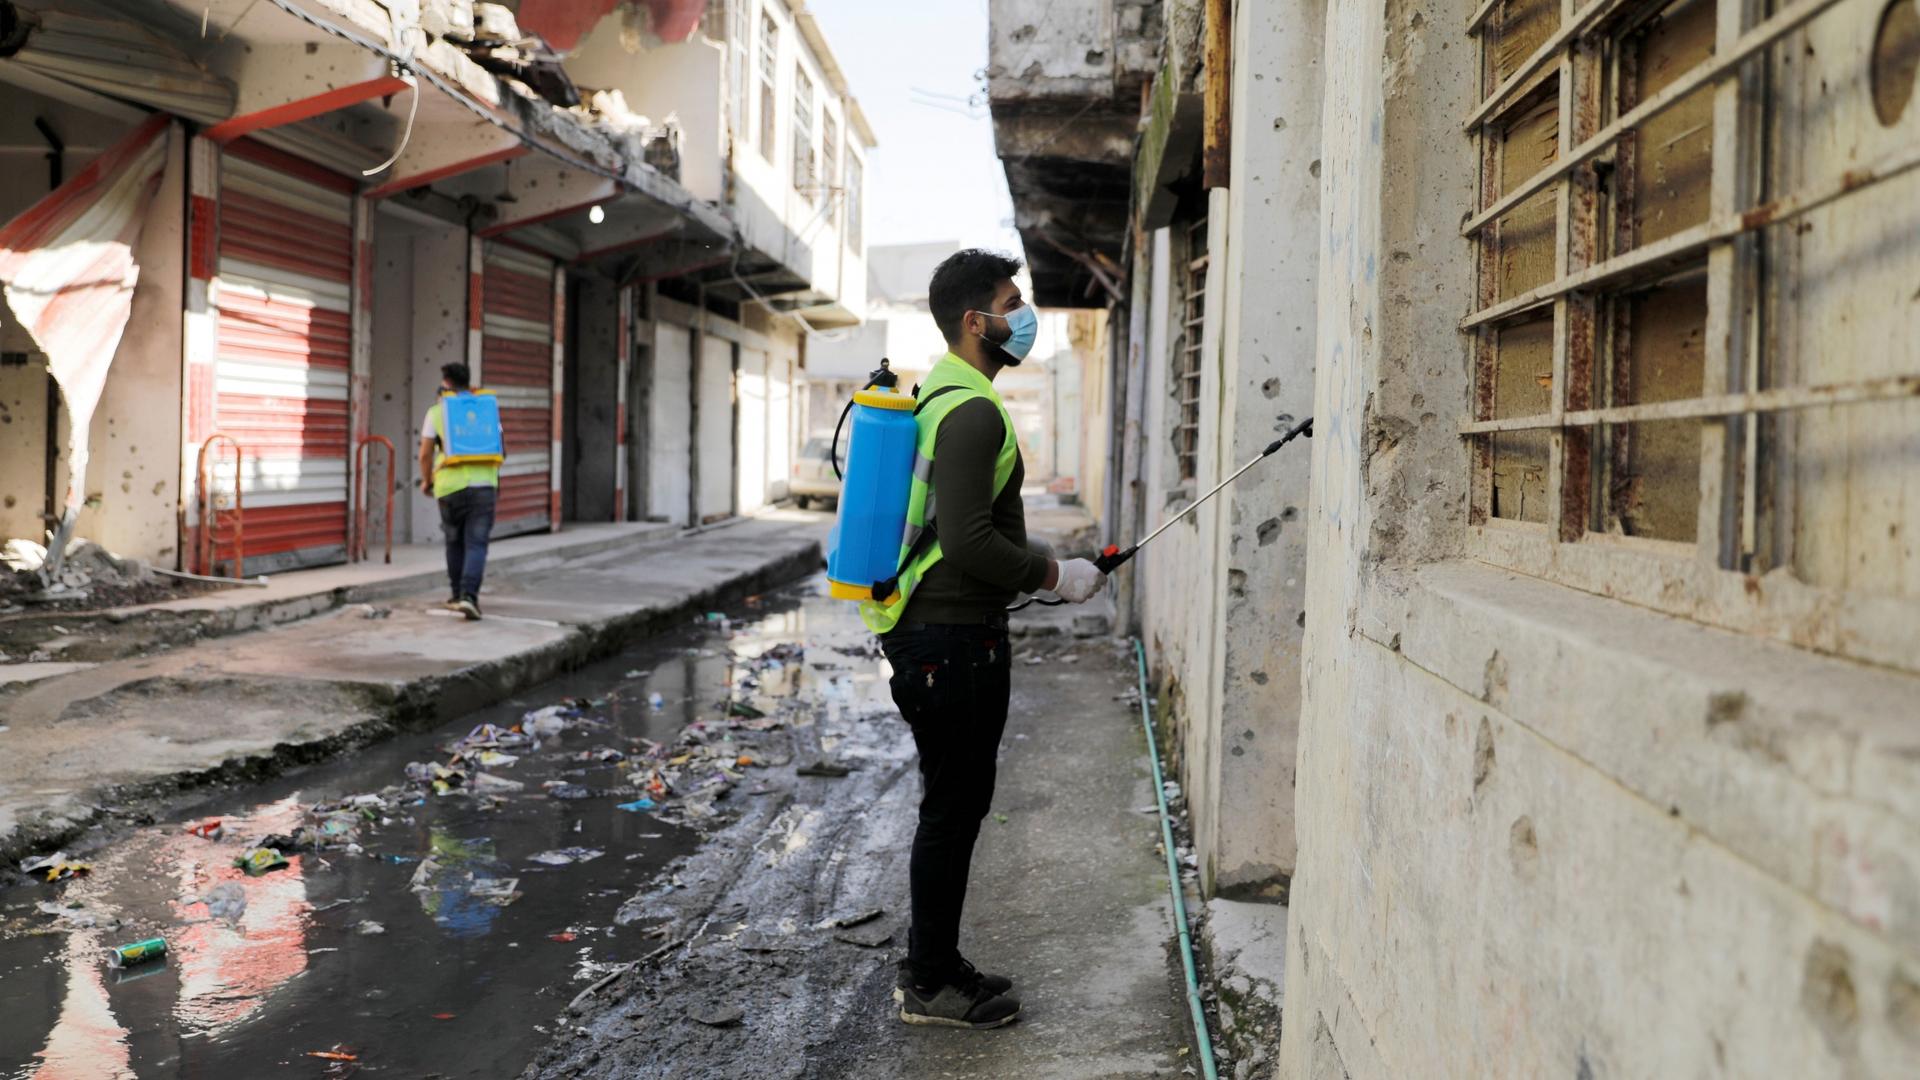 Iraqi young volunteers spray with disinfectants to combat an outbreak of coronavirus during a curfew imposed by Iraqi authorities, in the old city of Mosul, Iraq, March 15, 2020. 